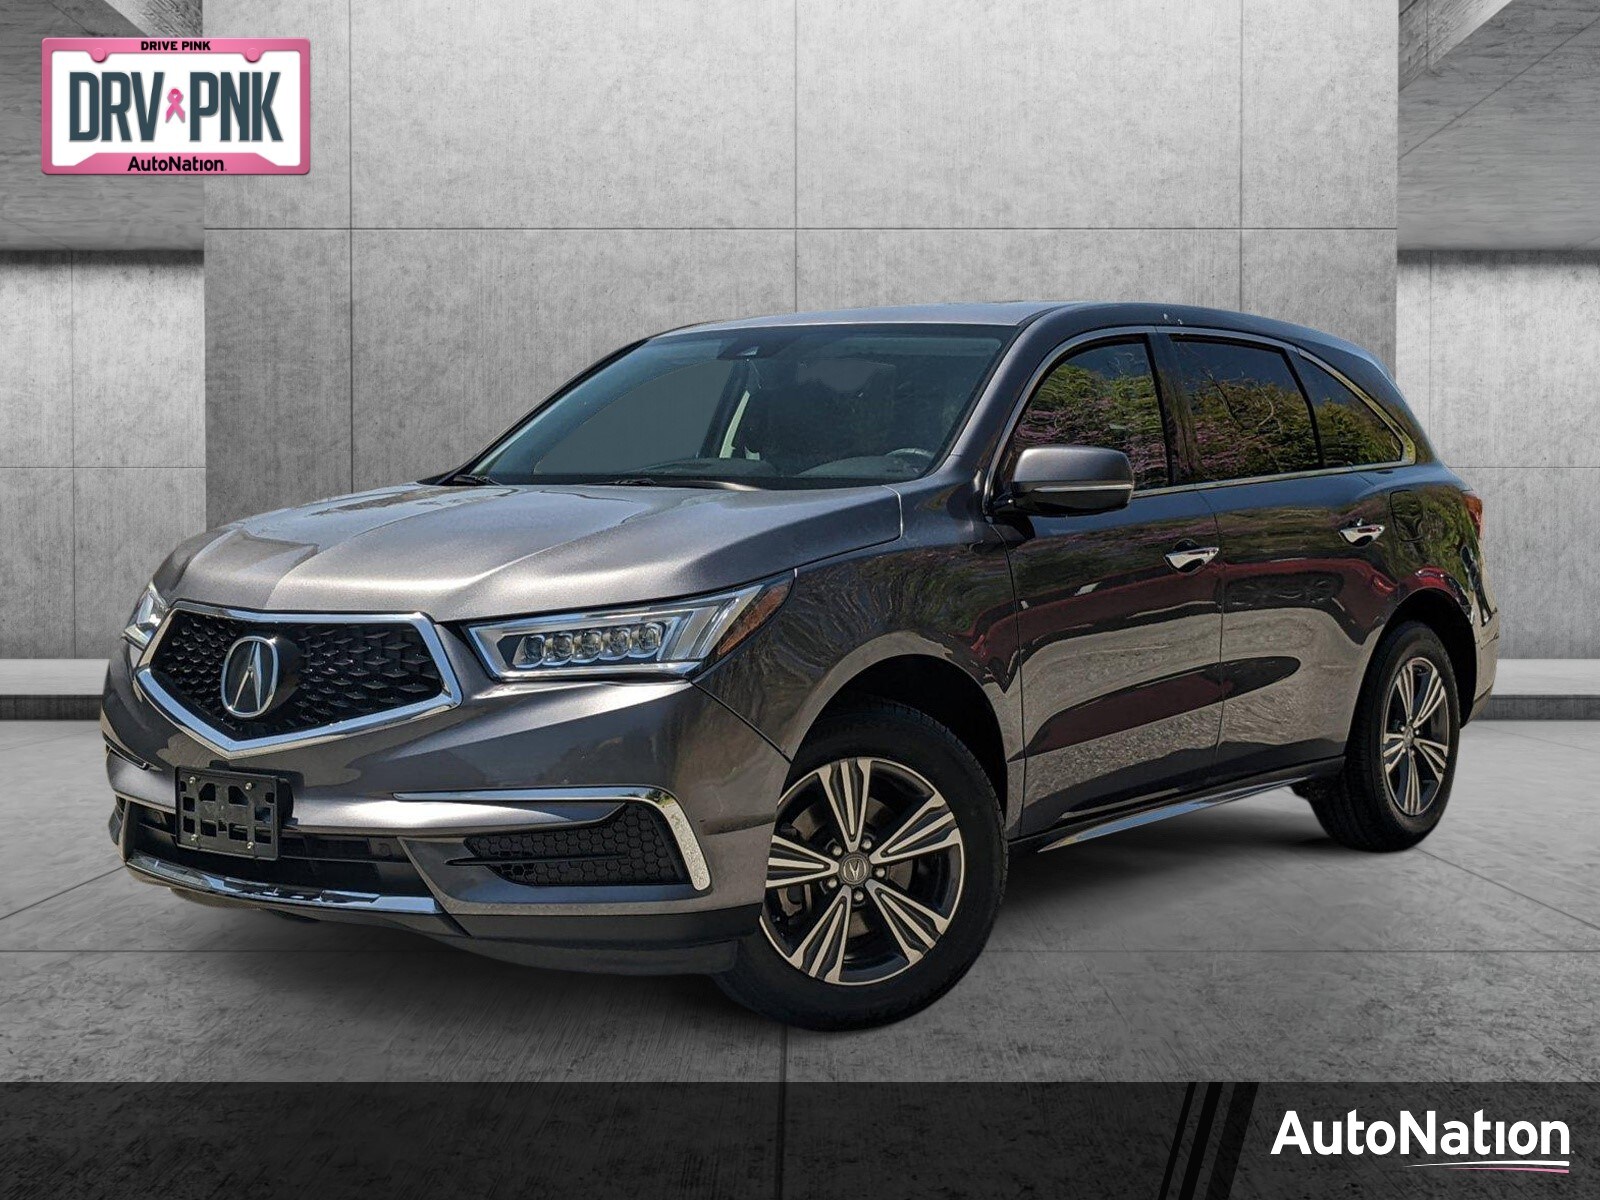 Used Acura Mdx Rockville Md